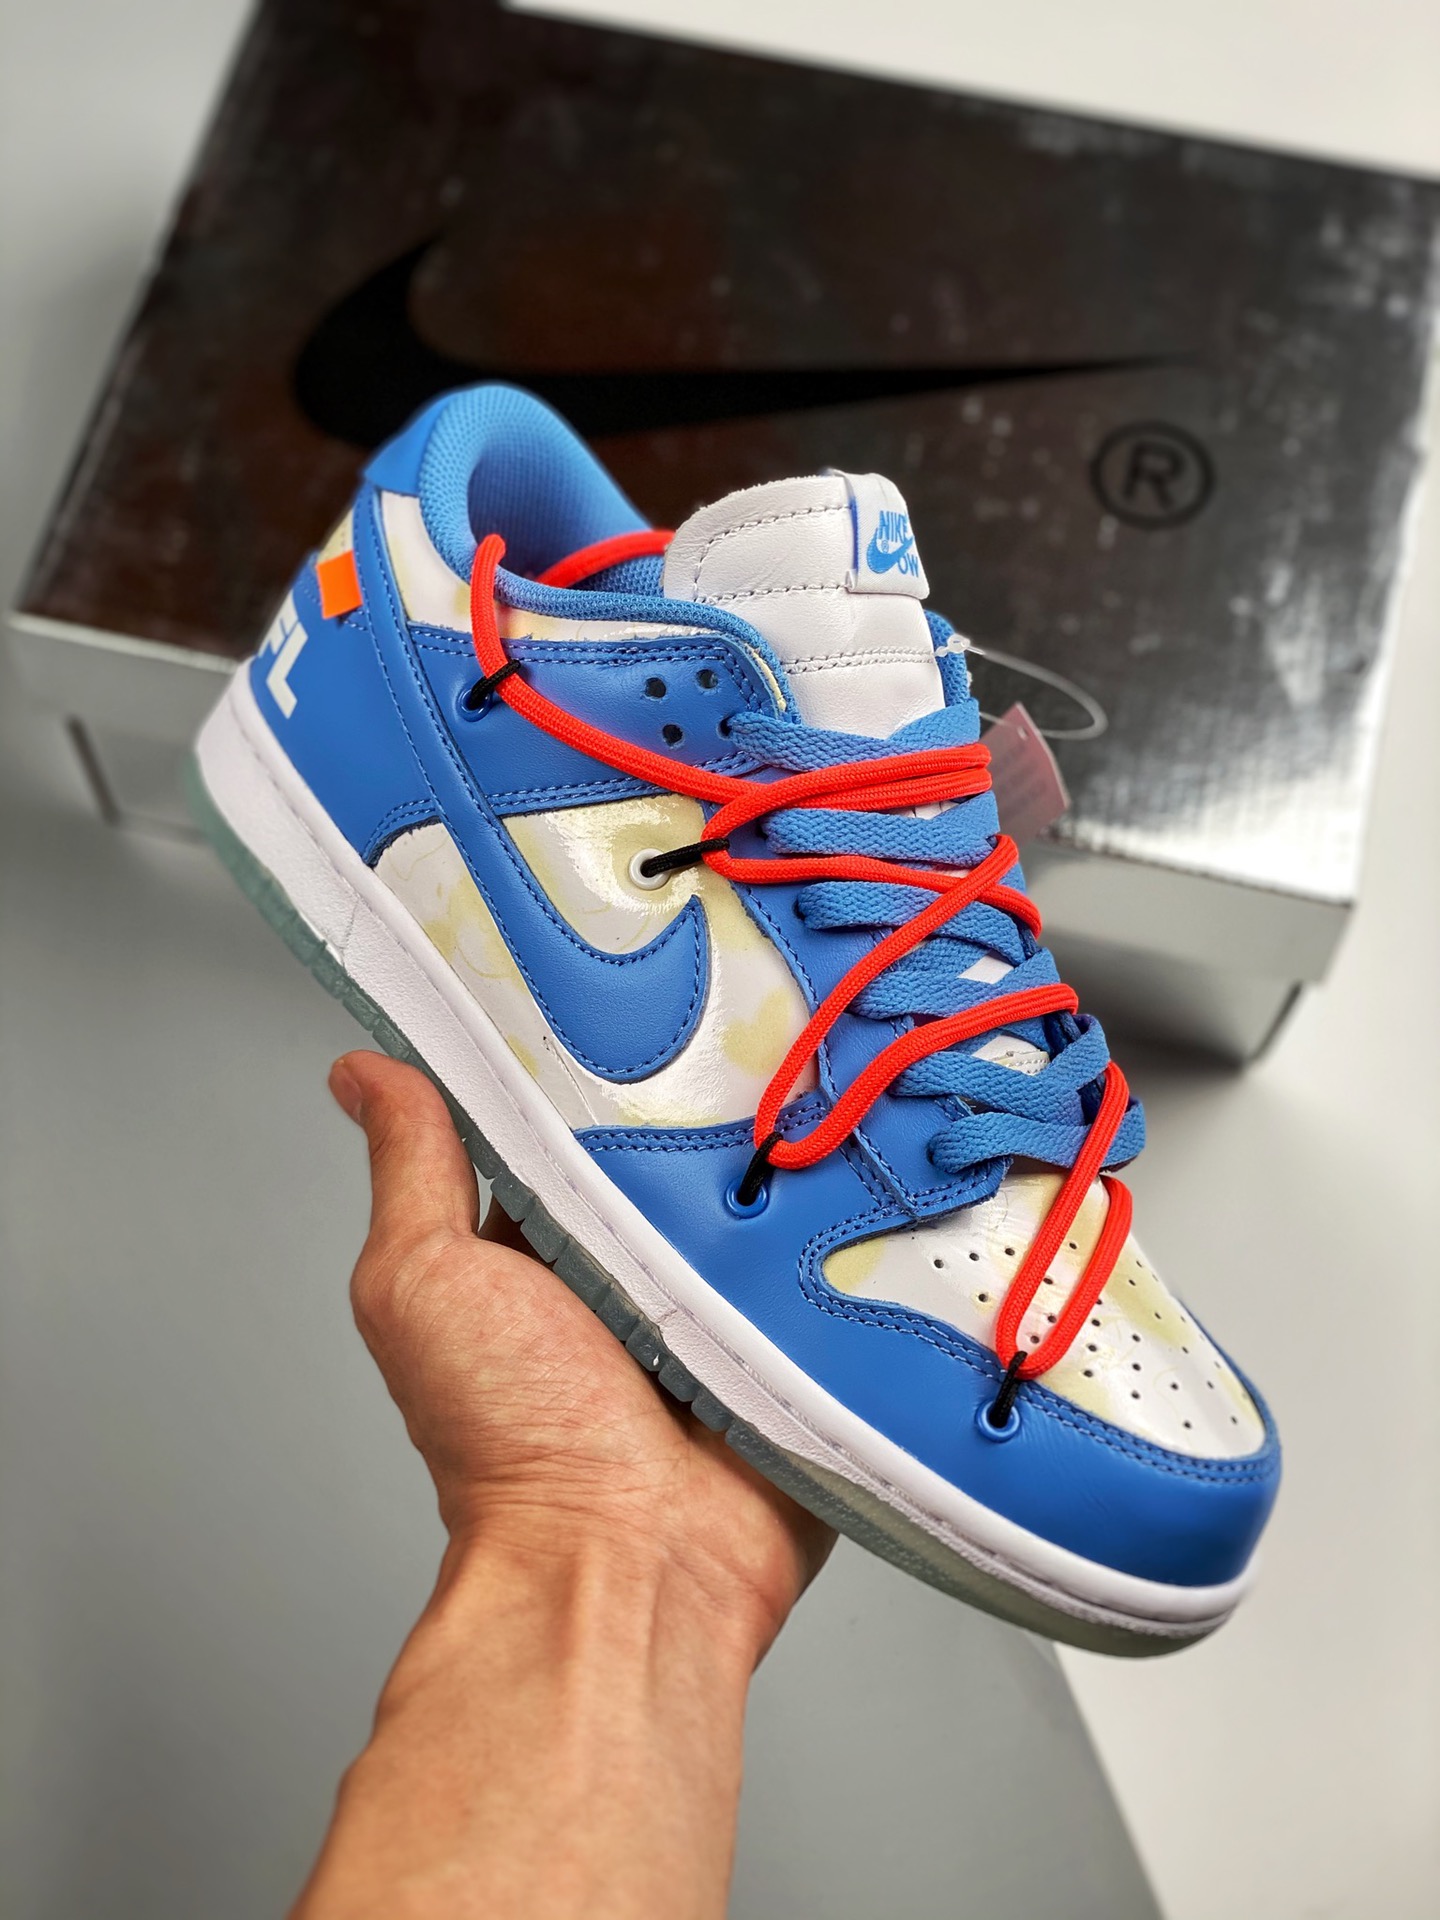 Buy > unc off white dunk > in stock